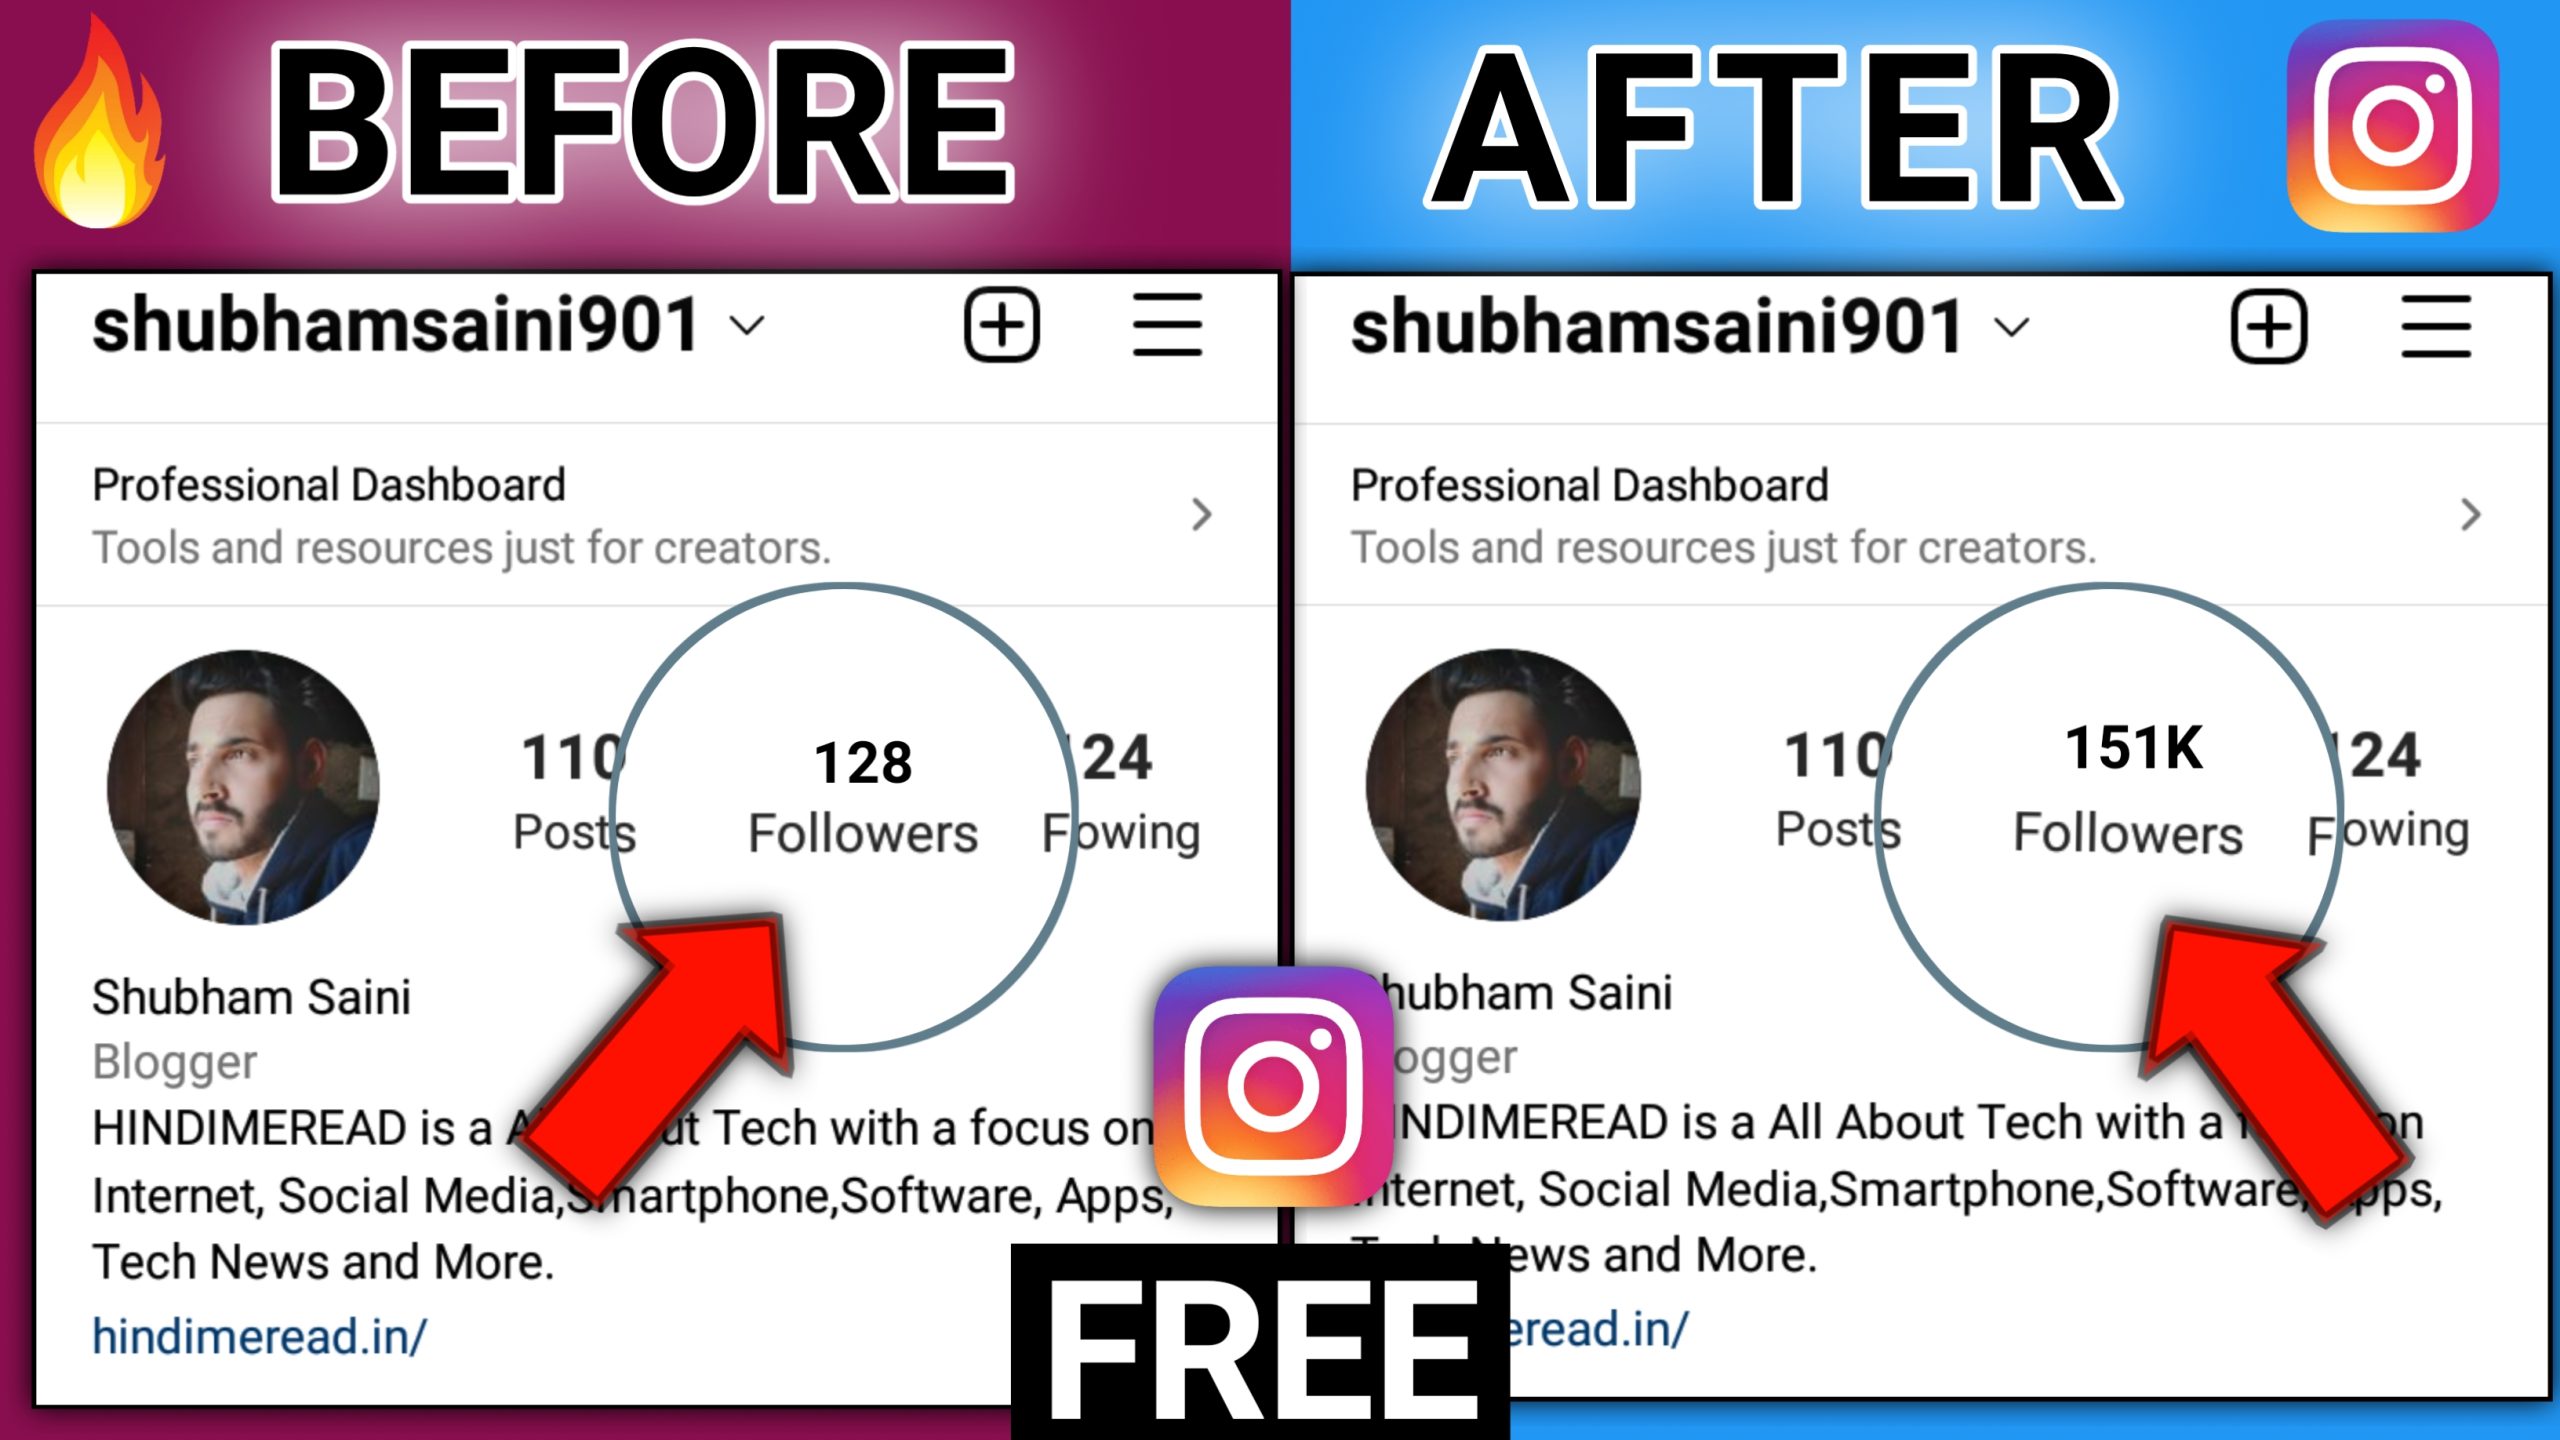 How to increase instagram followers